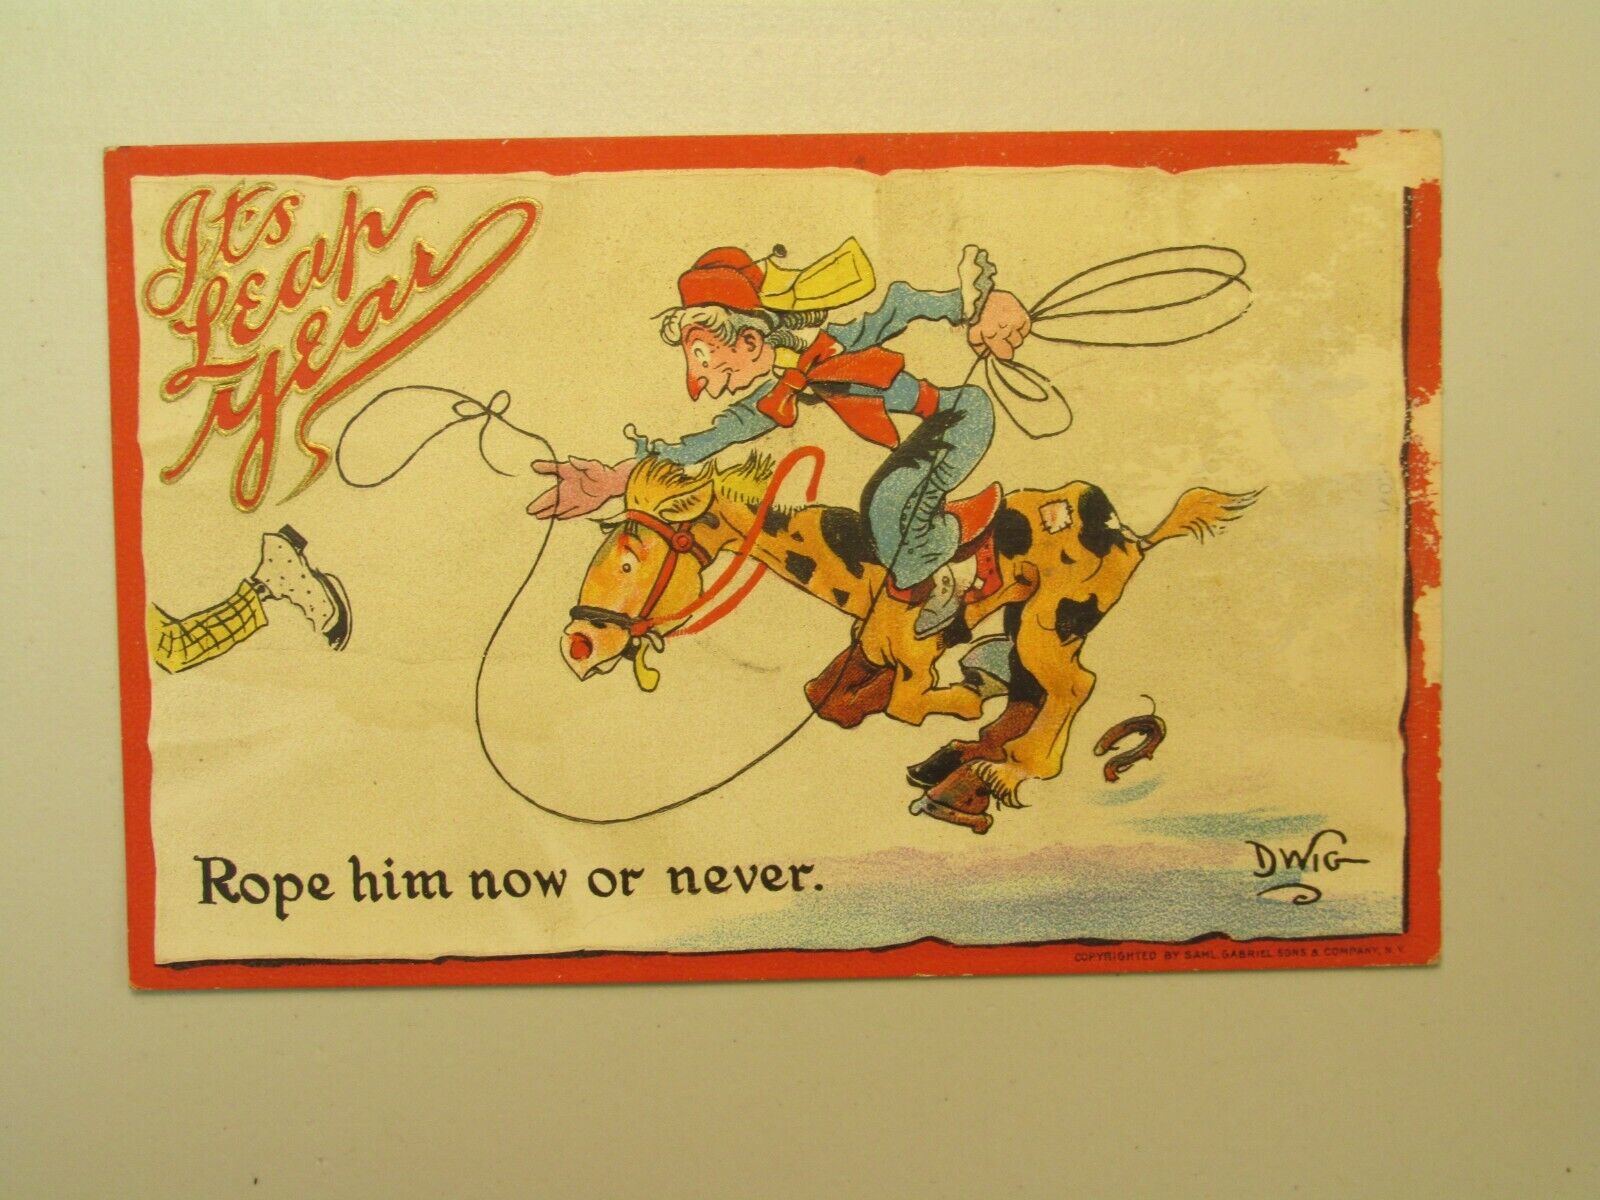 K1136 Postcard Leap Year lady riding horse roping a man now or never -poor cond